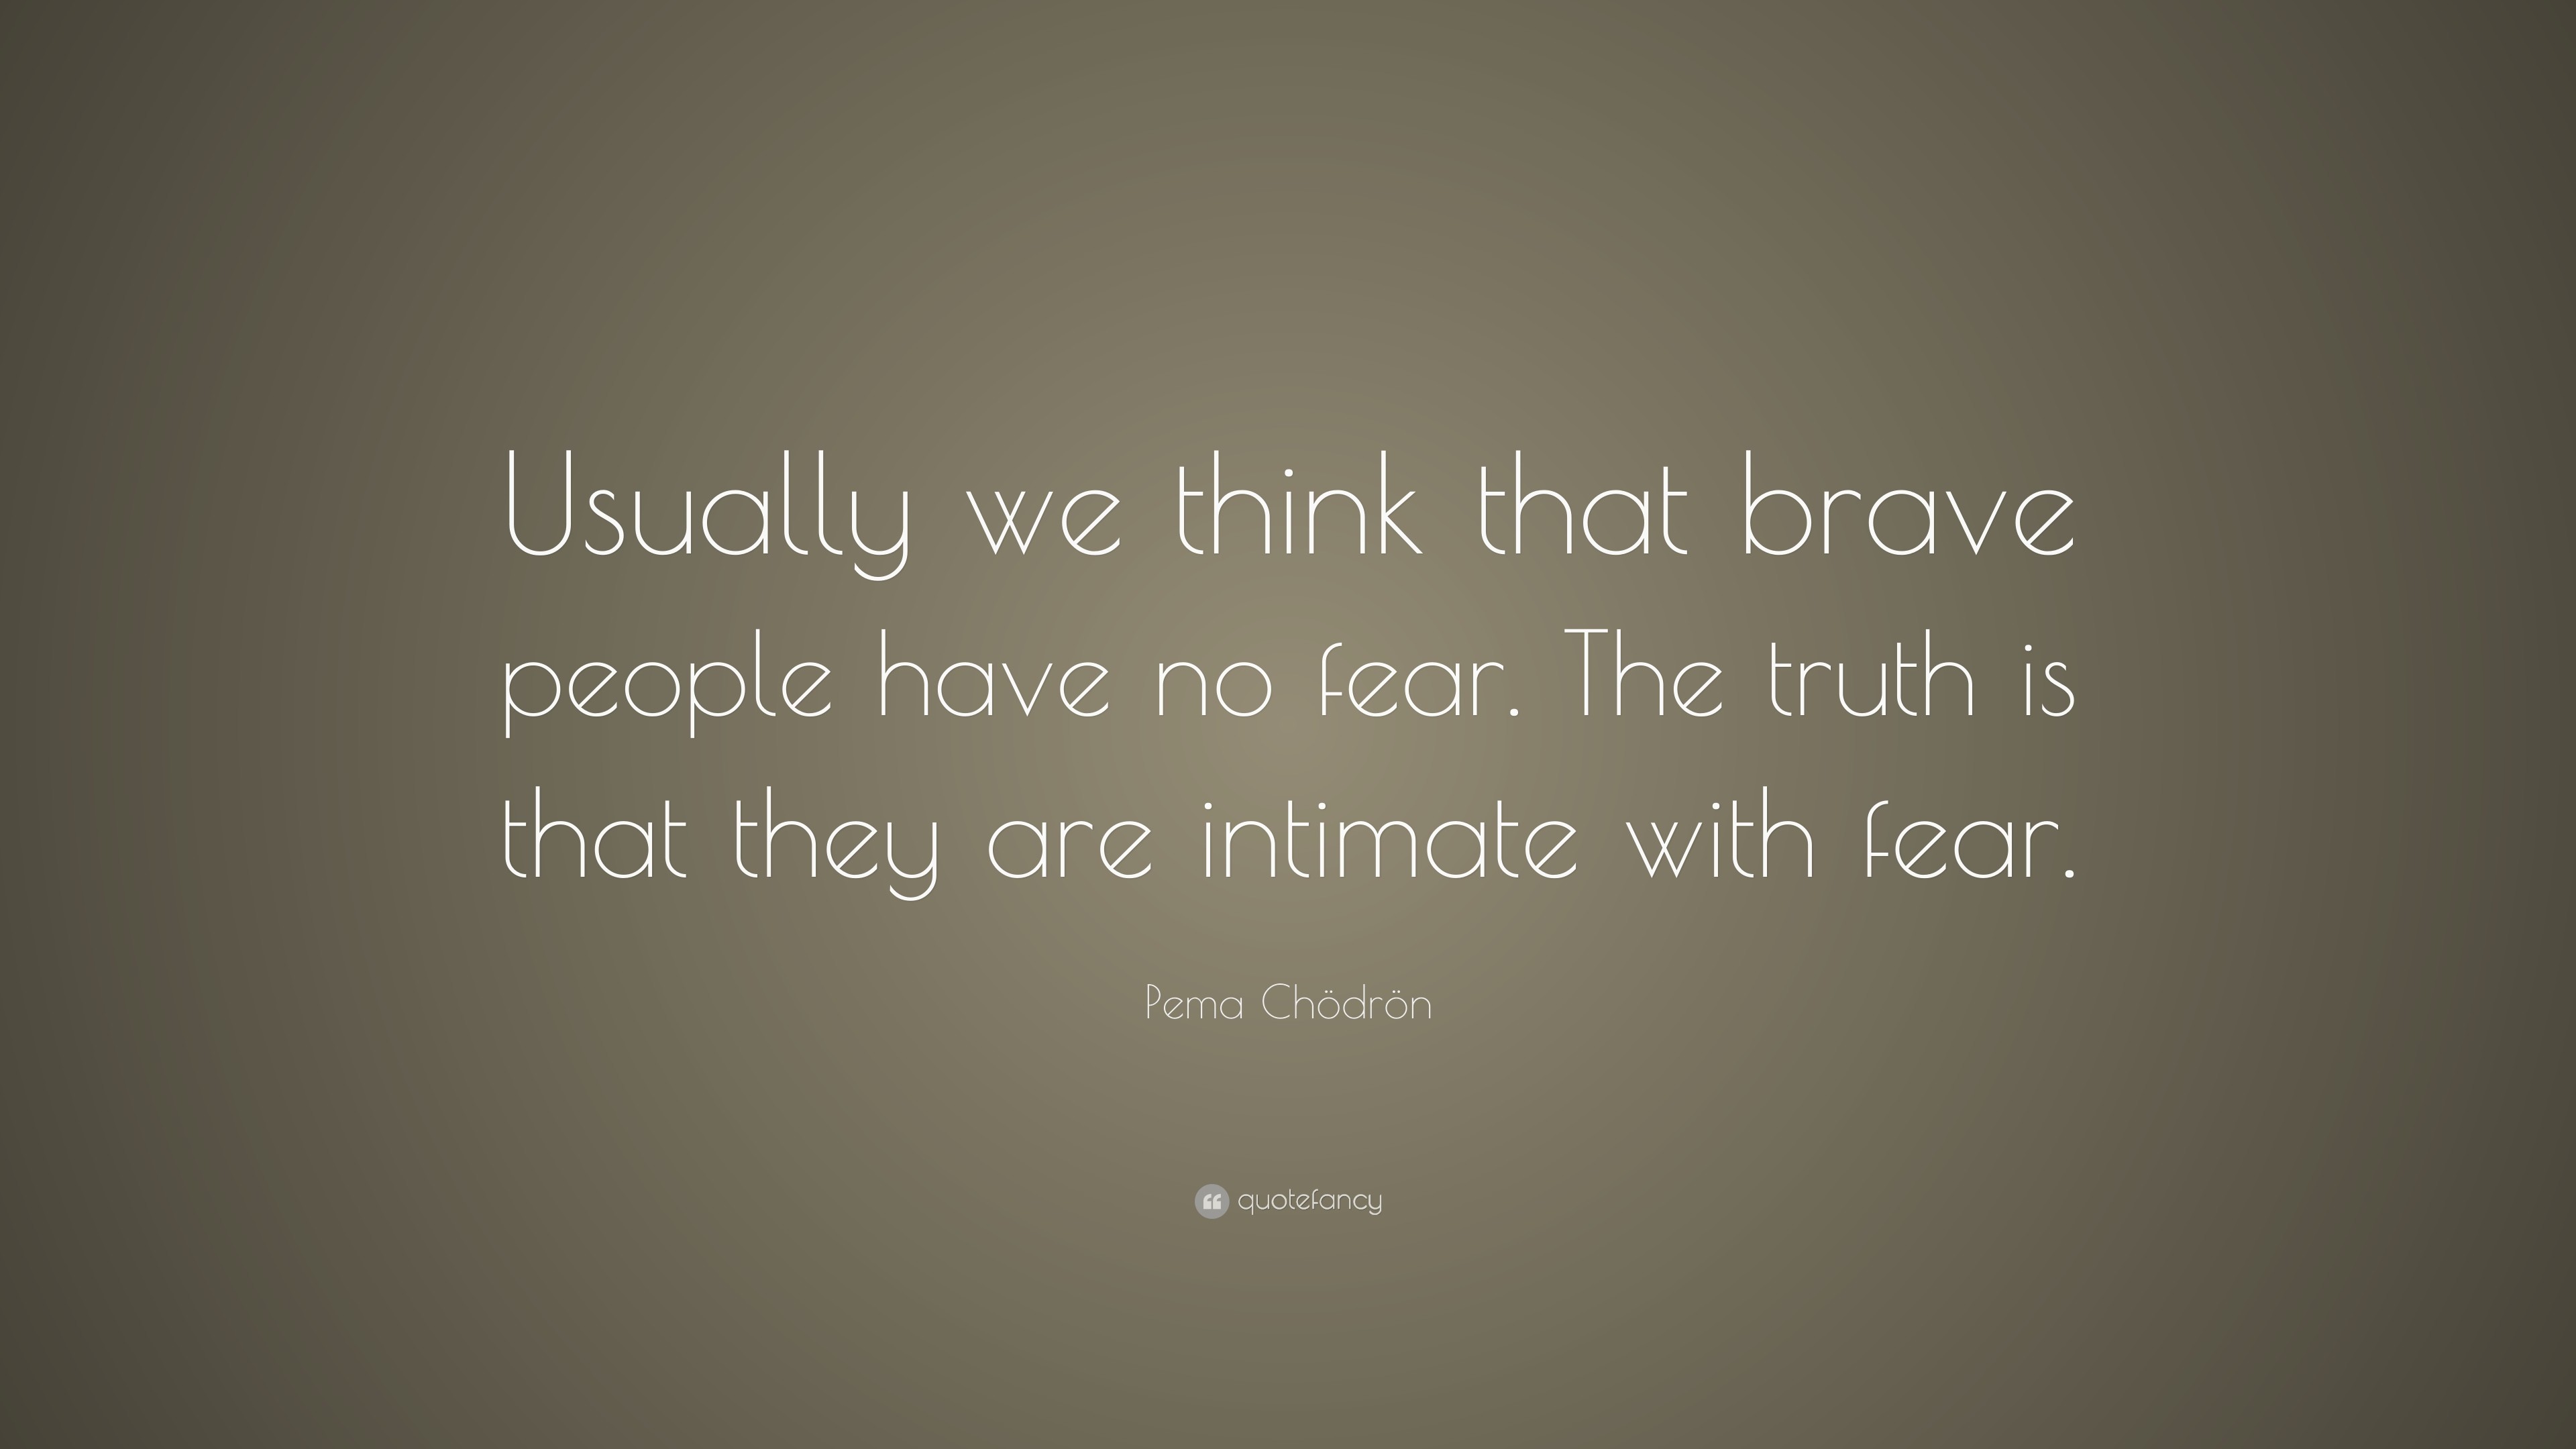 3840x2160 Pema ChÃ¶drÃ¶n Quote: “Usually we think that brave people have no fear. The